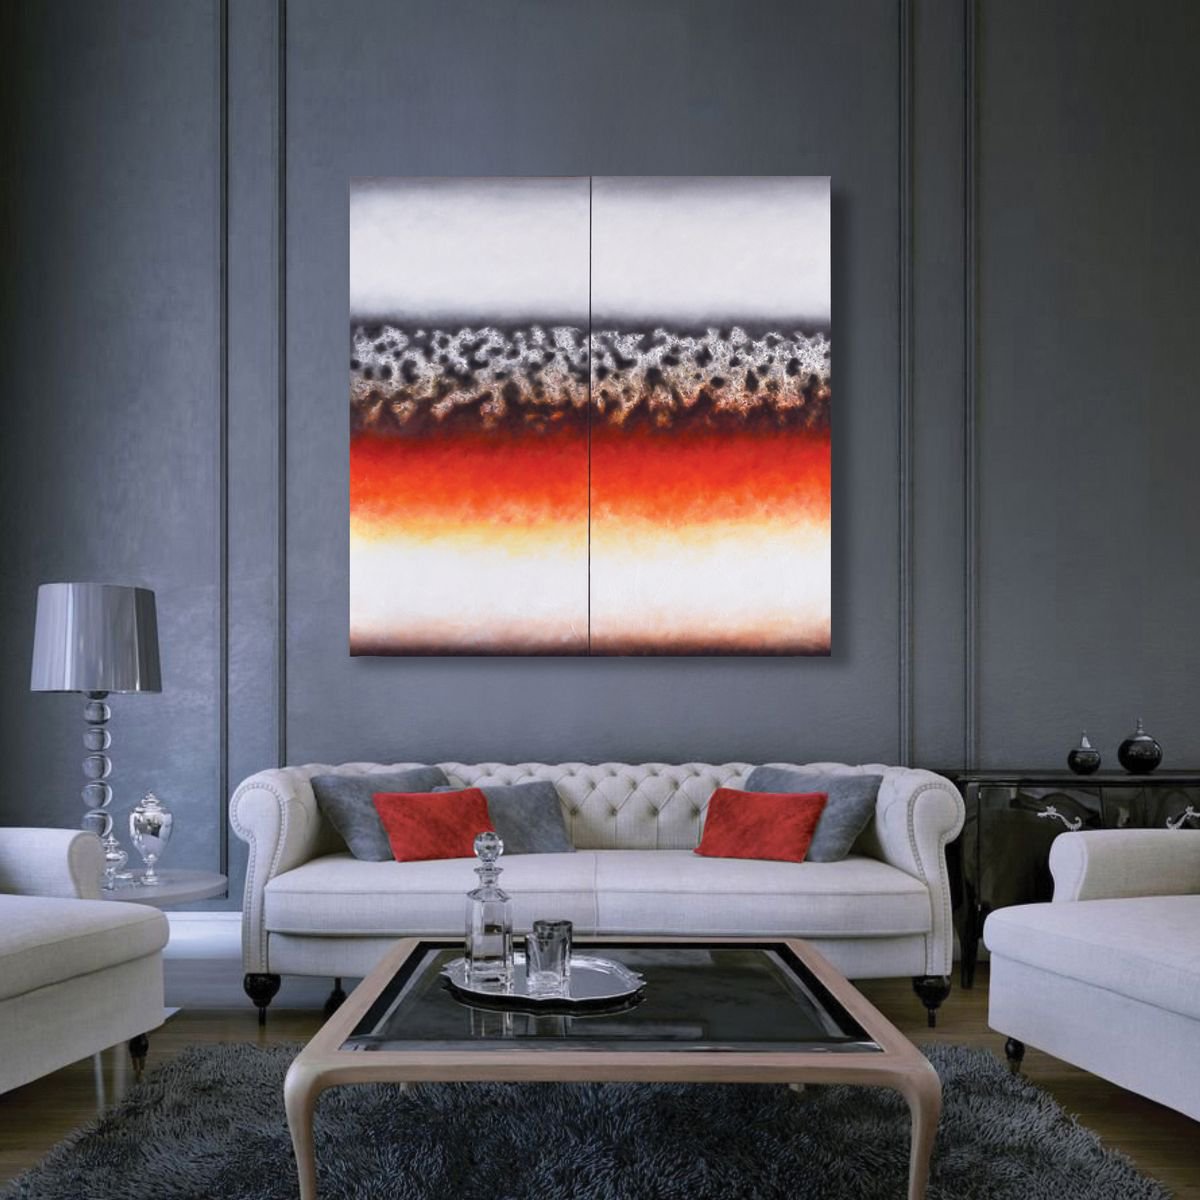 120�120 Diptych White/Black/Red/Silver Large Abstract Wall Decor Oil Painting by Waldemar Kaliczak